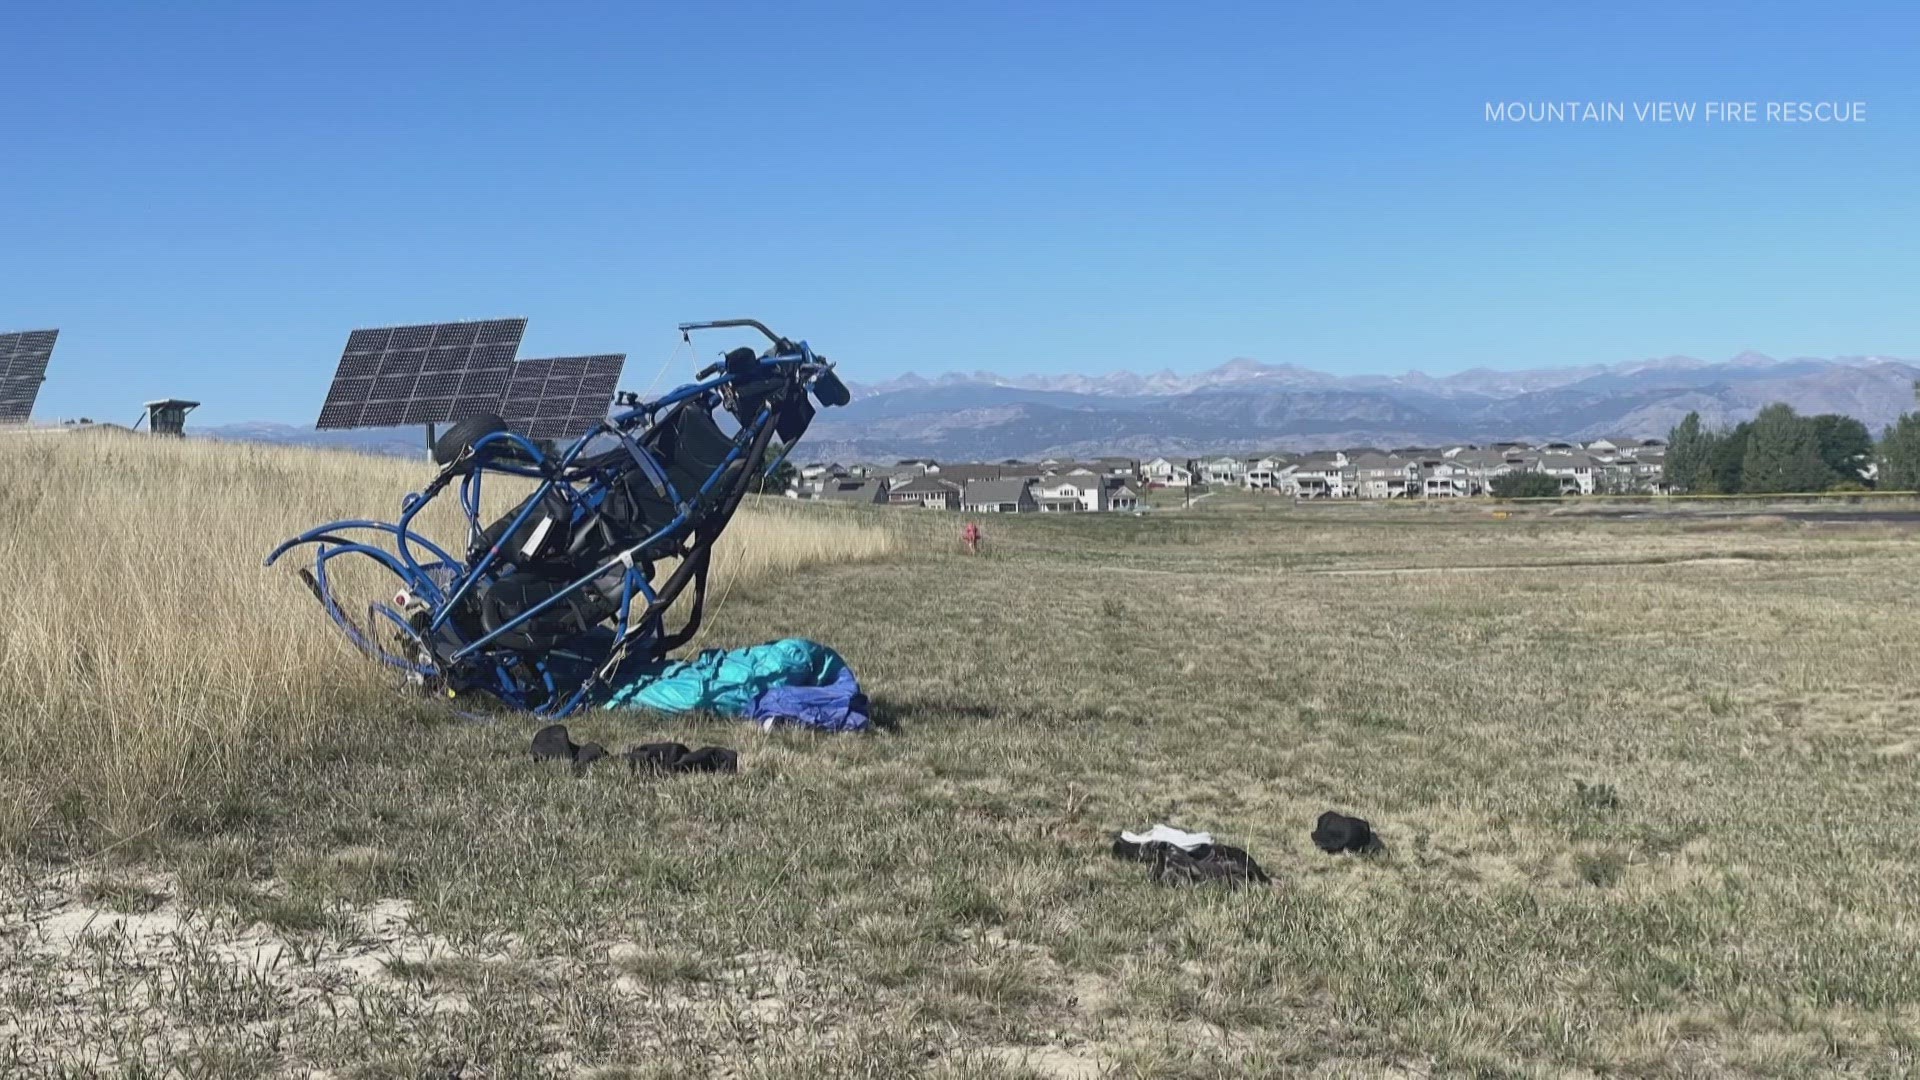 The aircraft entered a grass field, impacted terrain and cartwheeled, and the pilot was ejected, a preliminary report says.